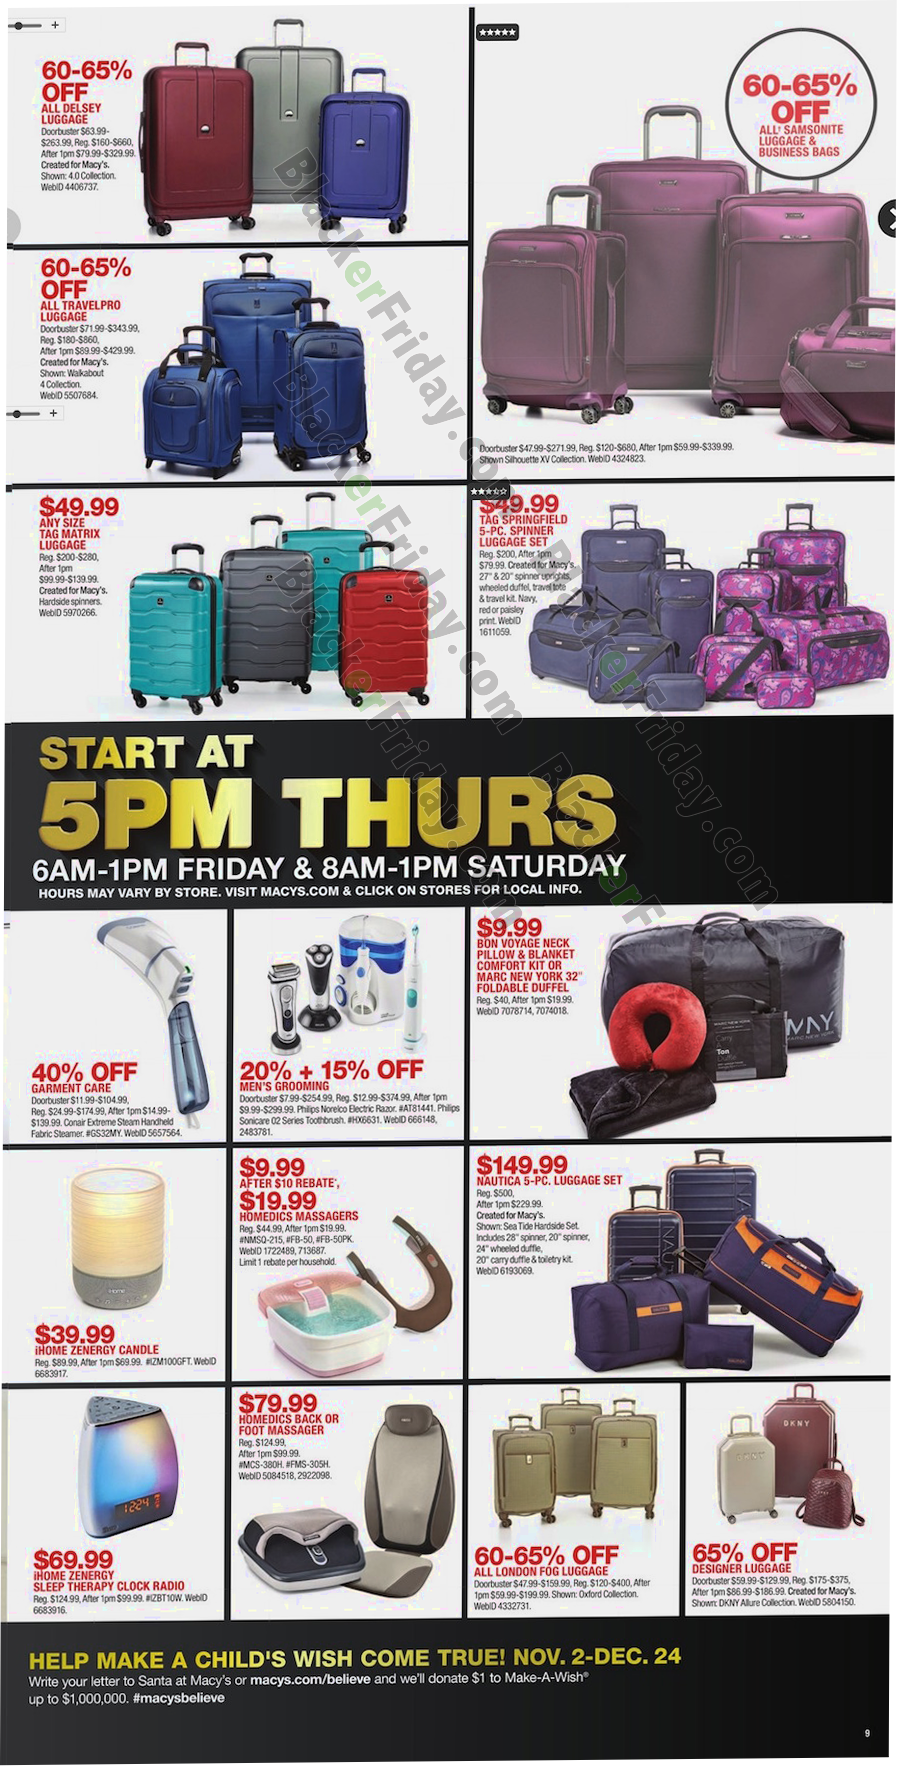 Macy&#39;s Black Friday 2019 Ad is Released! See What&#39;s on Sale - Blacker Friday